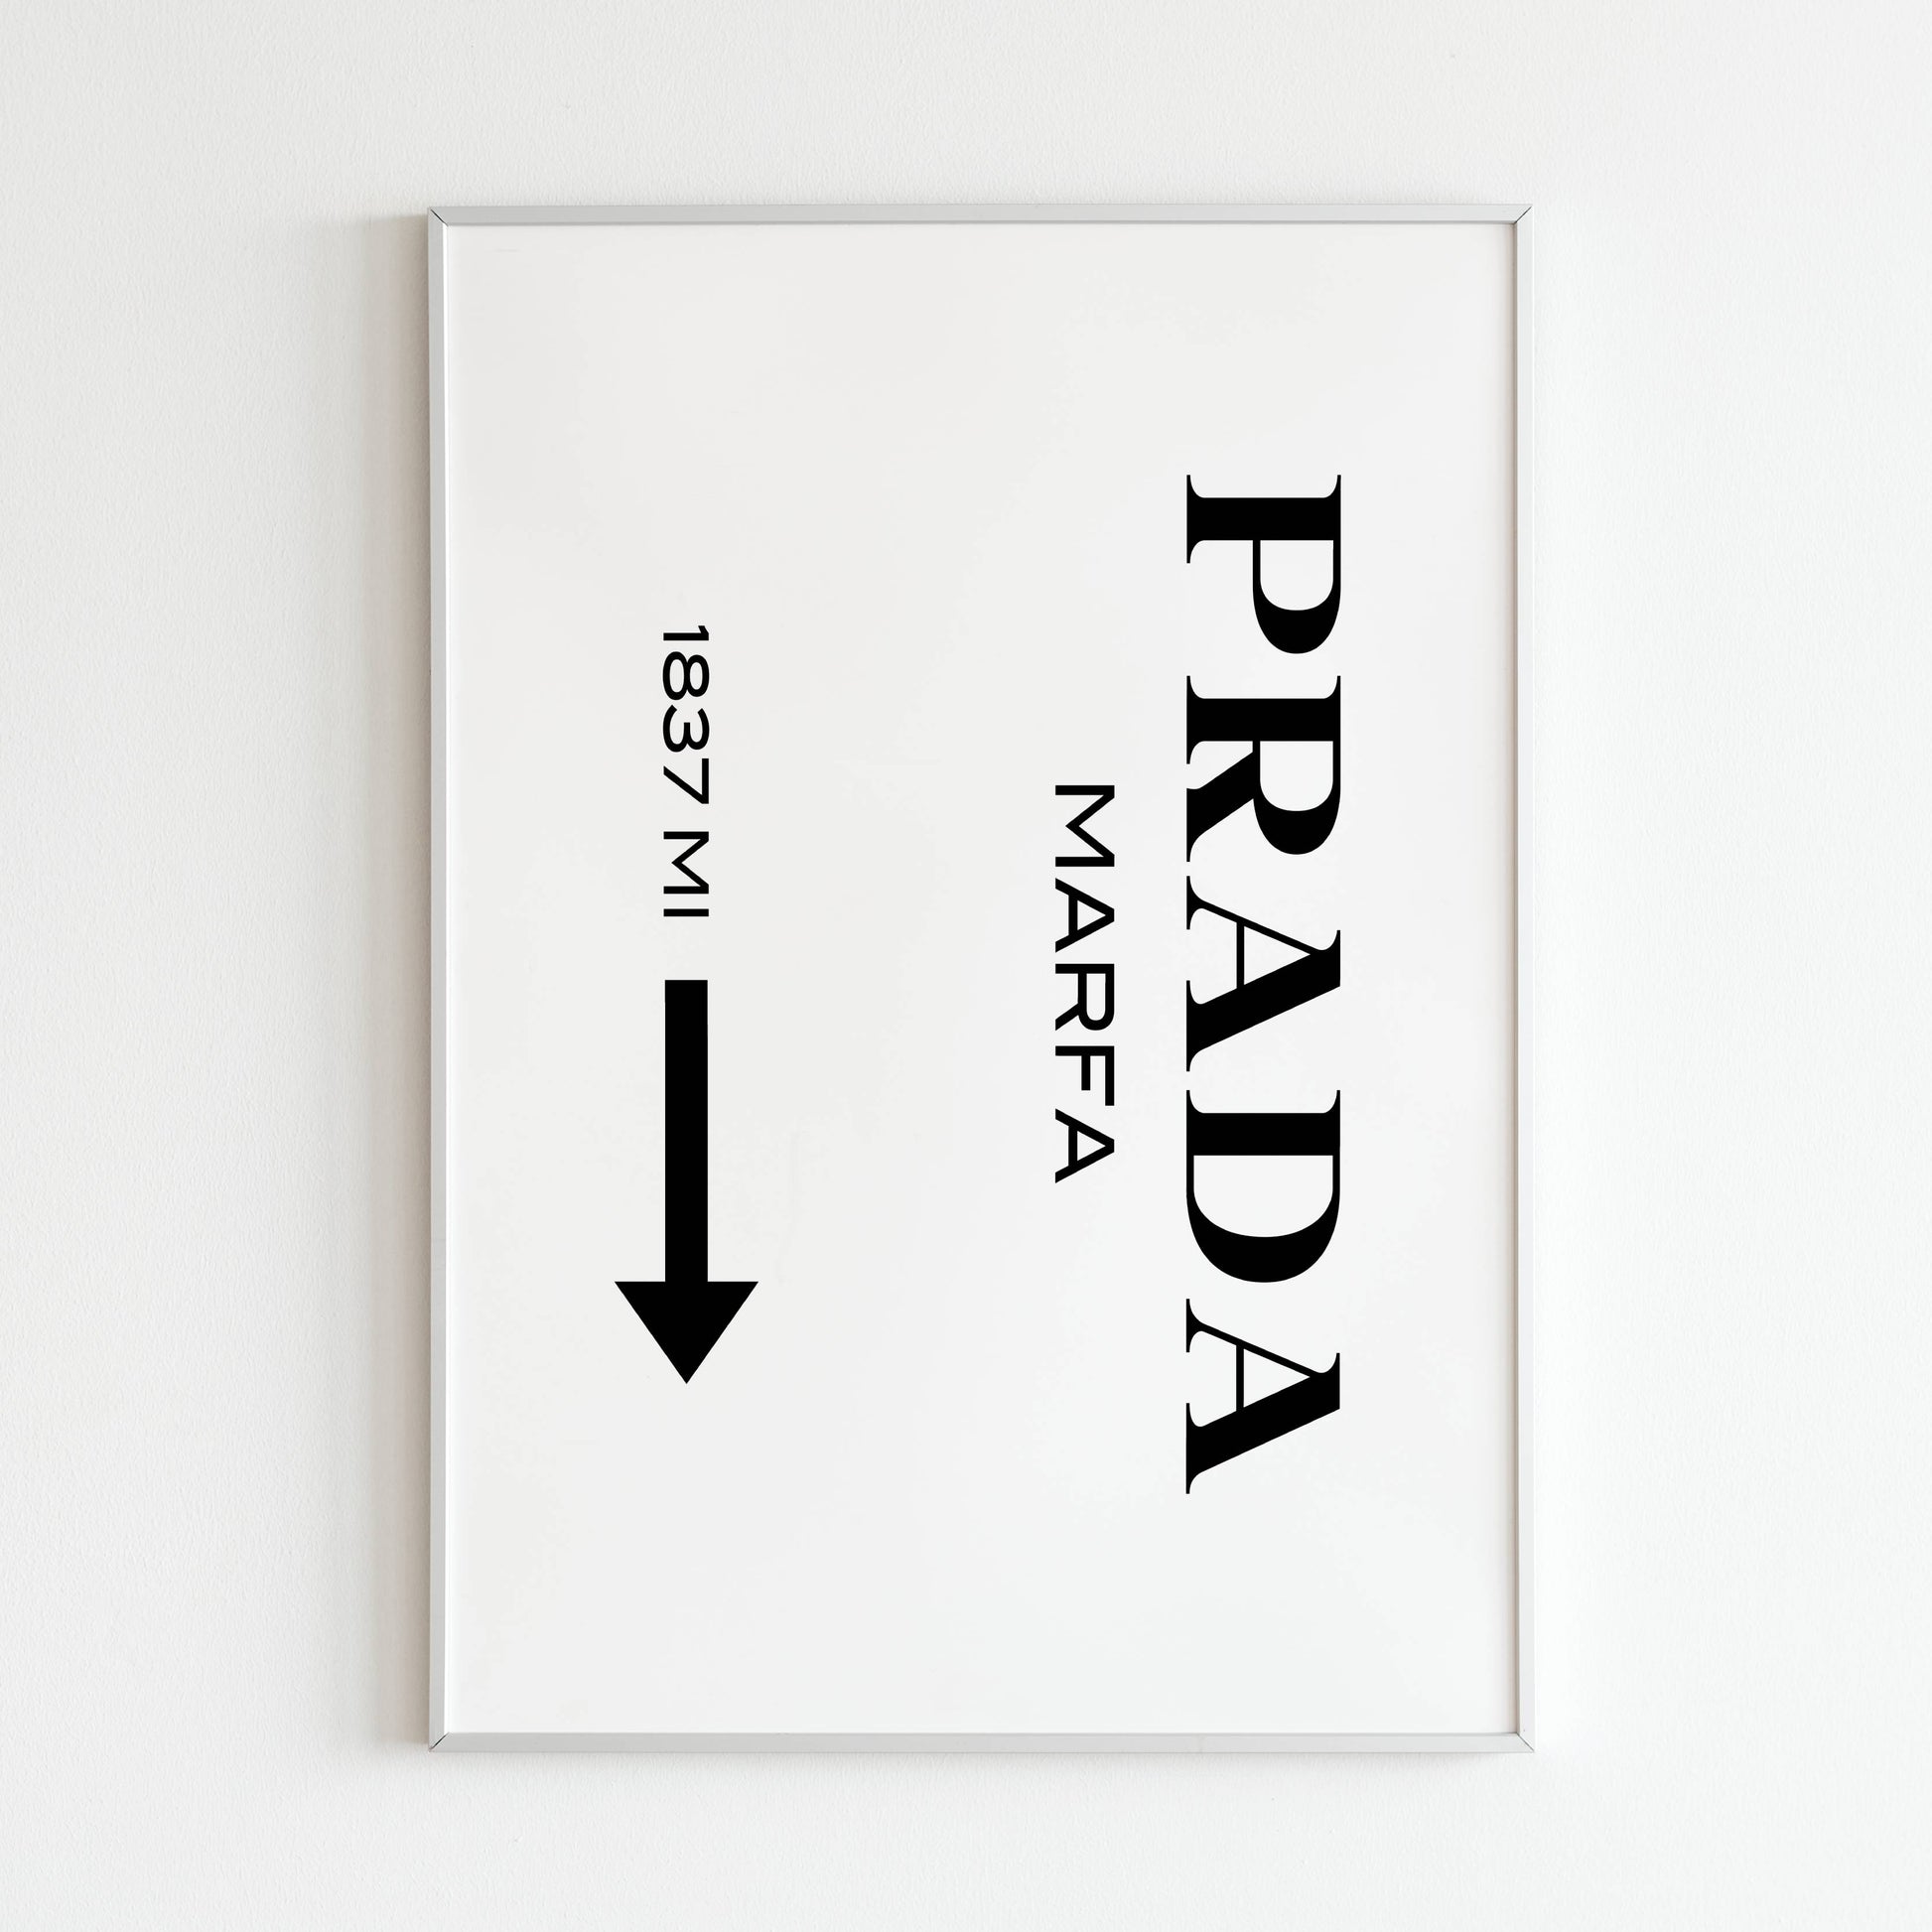 Prada Marfa - Original artwork close-up of printable wall art poster. Focus on the details and artistic style.